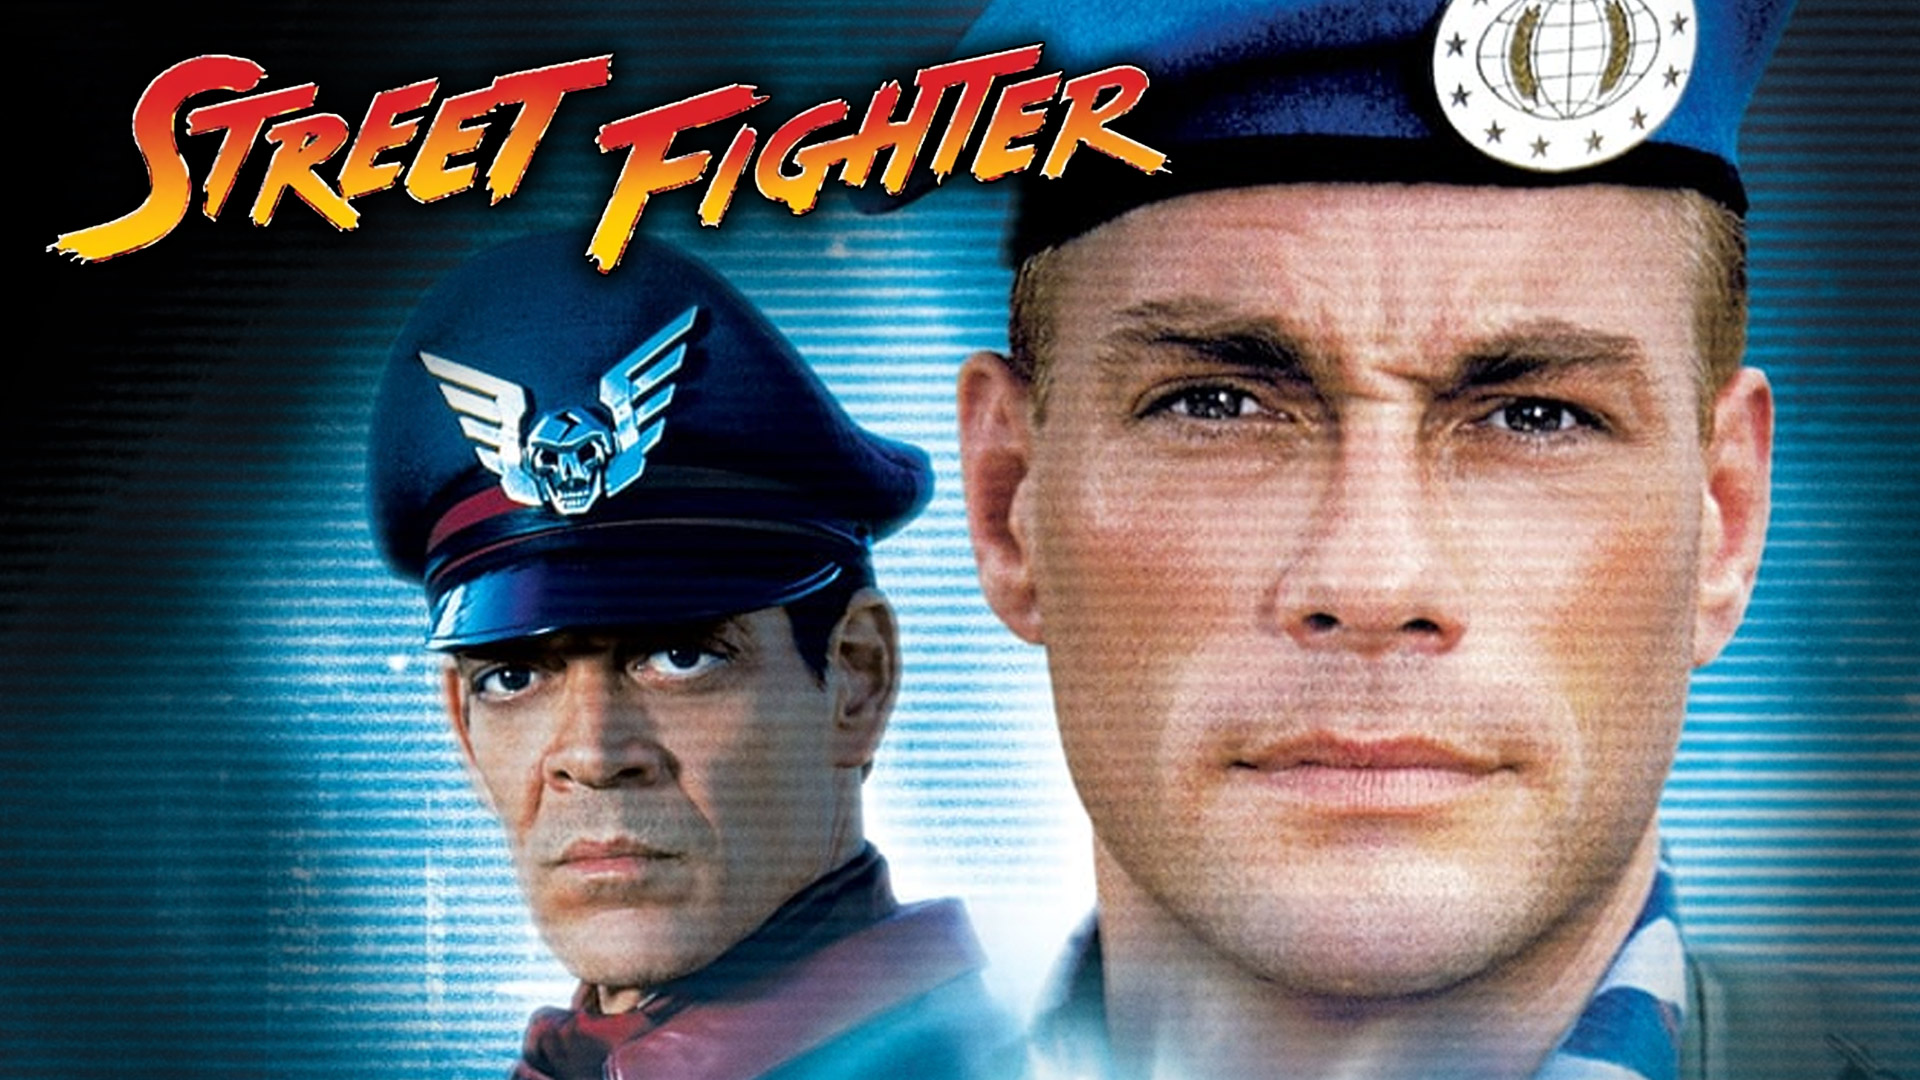 The original Street Fighter: The Movie is free to watch on YouTube